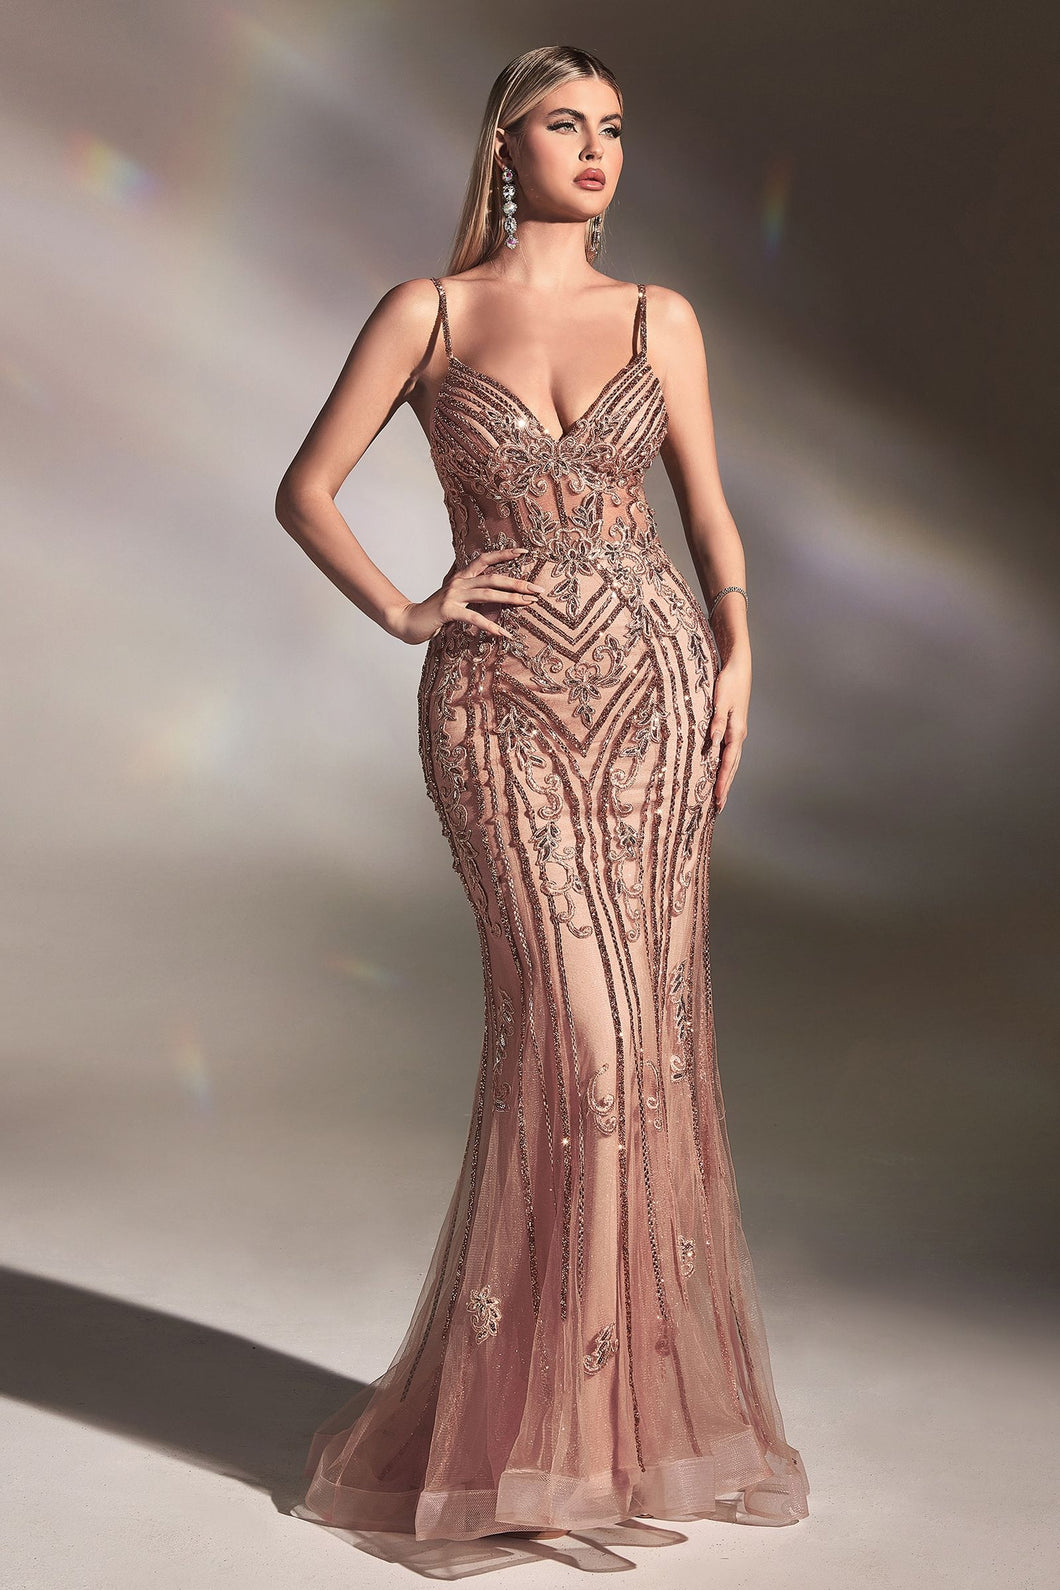 CD CD992 - In-Line Beaded Lace Embellished Fit & Flare Prom Gown with Sheer Boned Bodice PROM GOWN Cinderella Divine 2 ROSE GOLD 